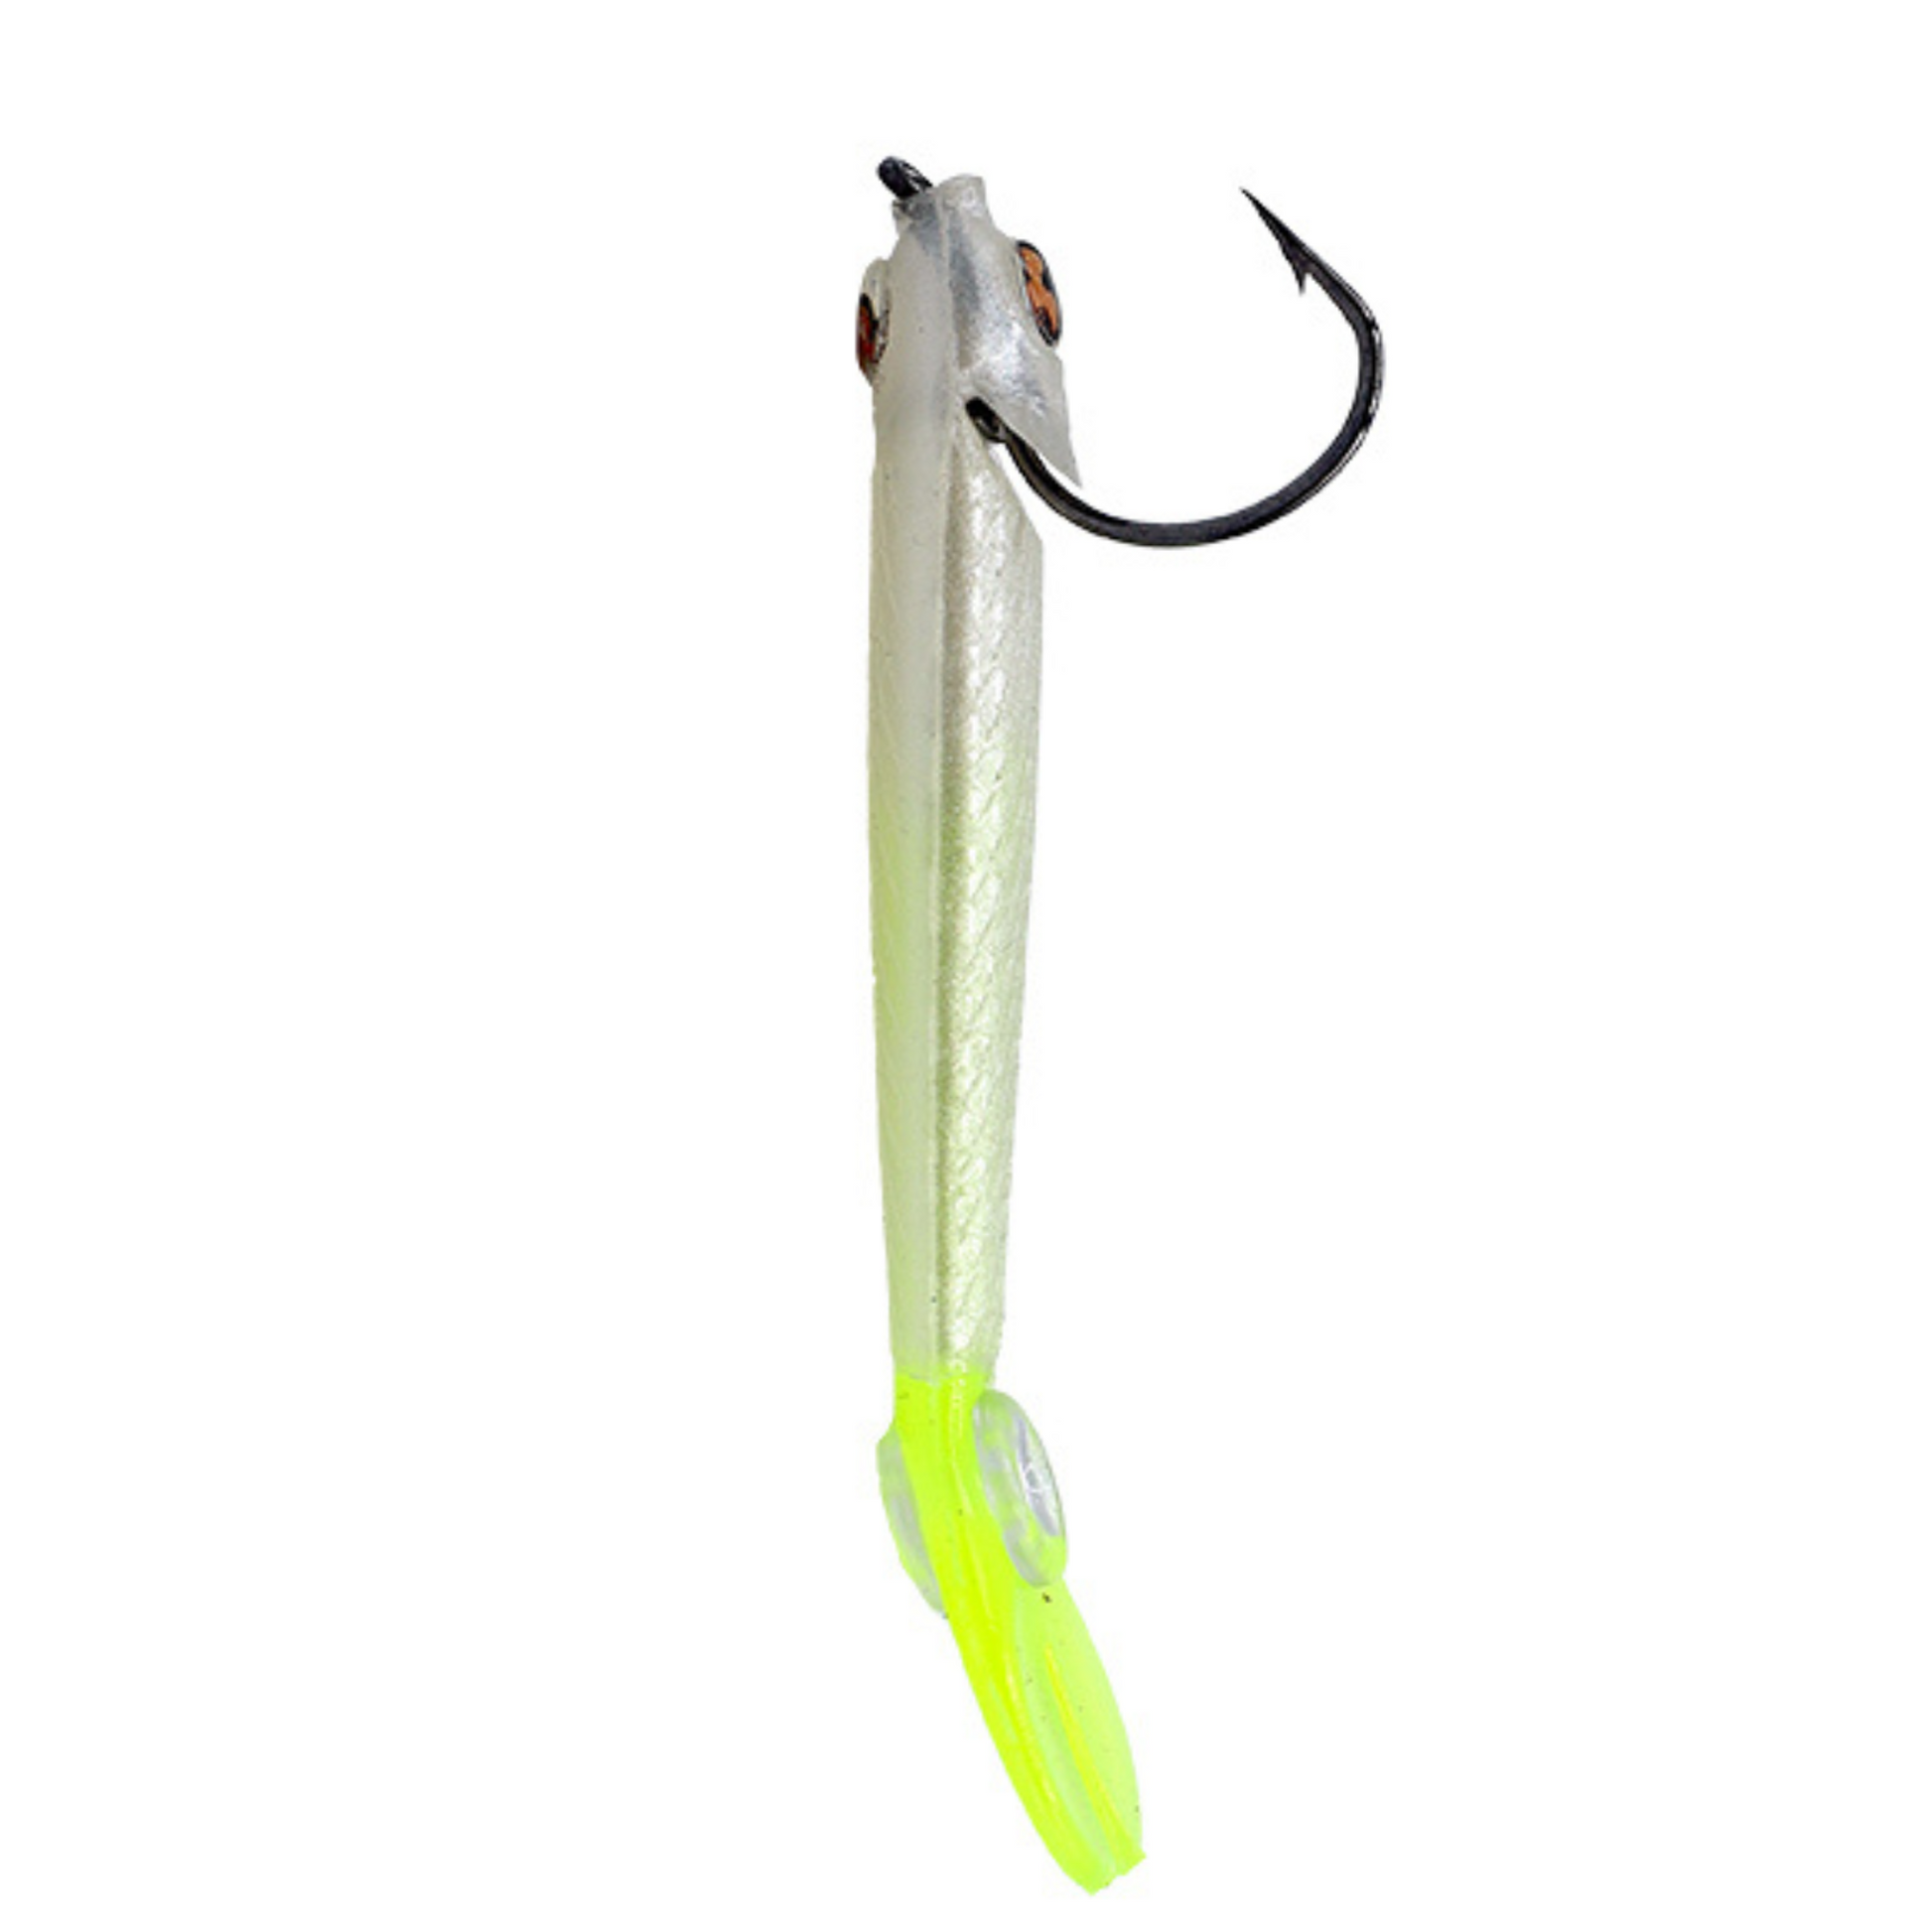 5.25 5pc. Recoil Baits - Pearl White Chartreuse Tail – Lawless Lures